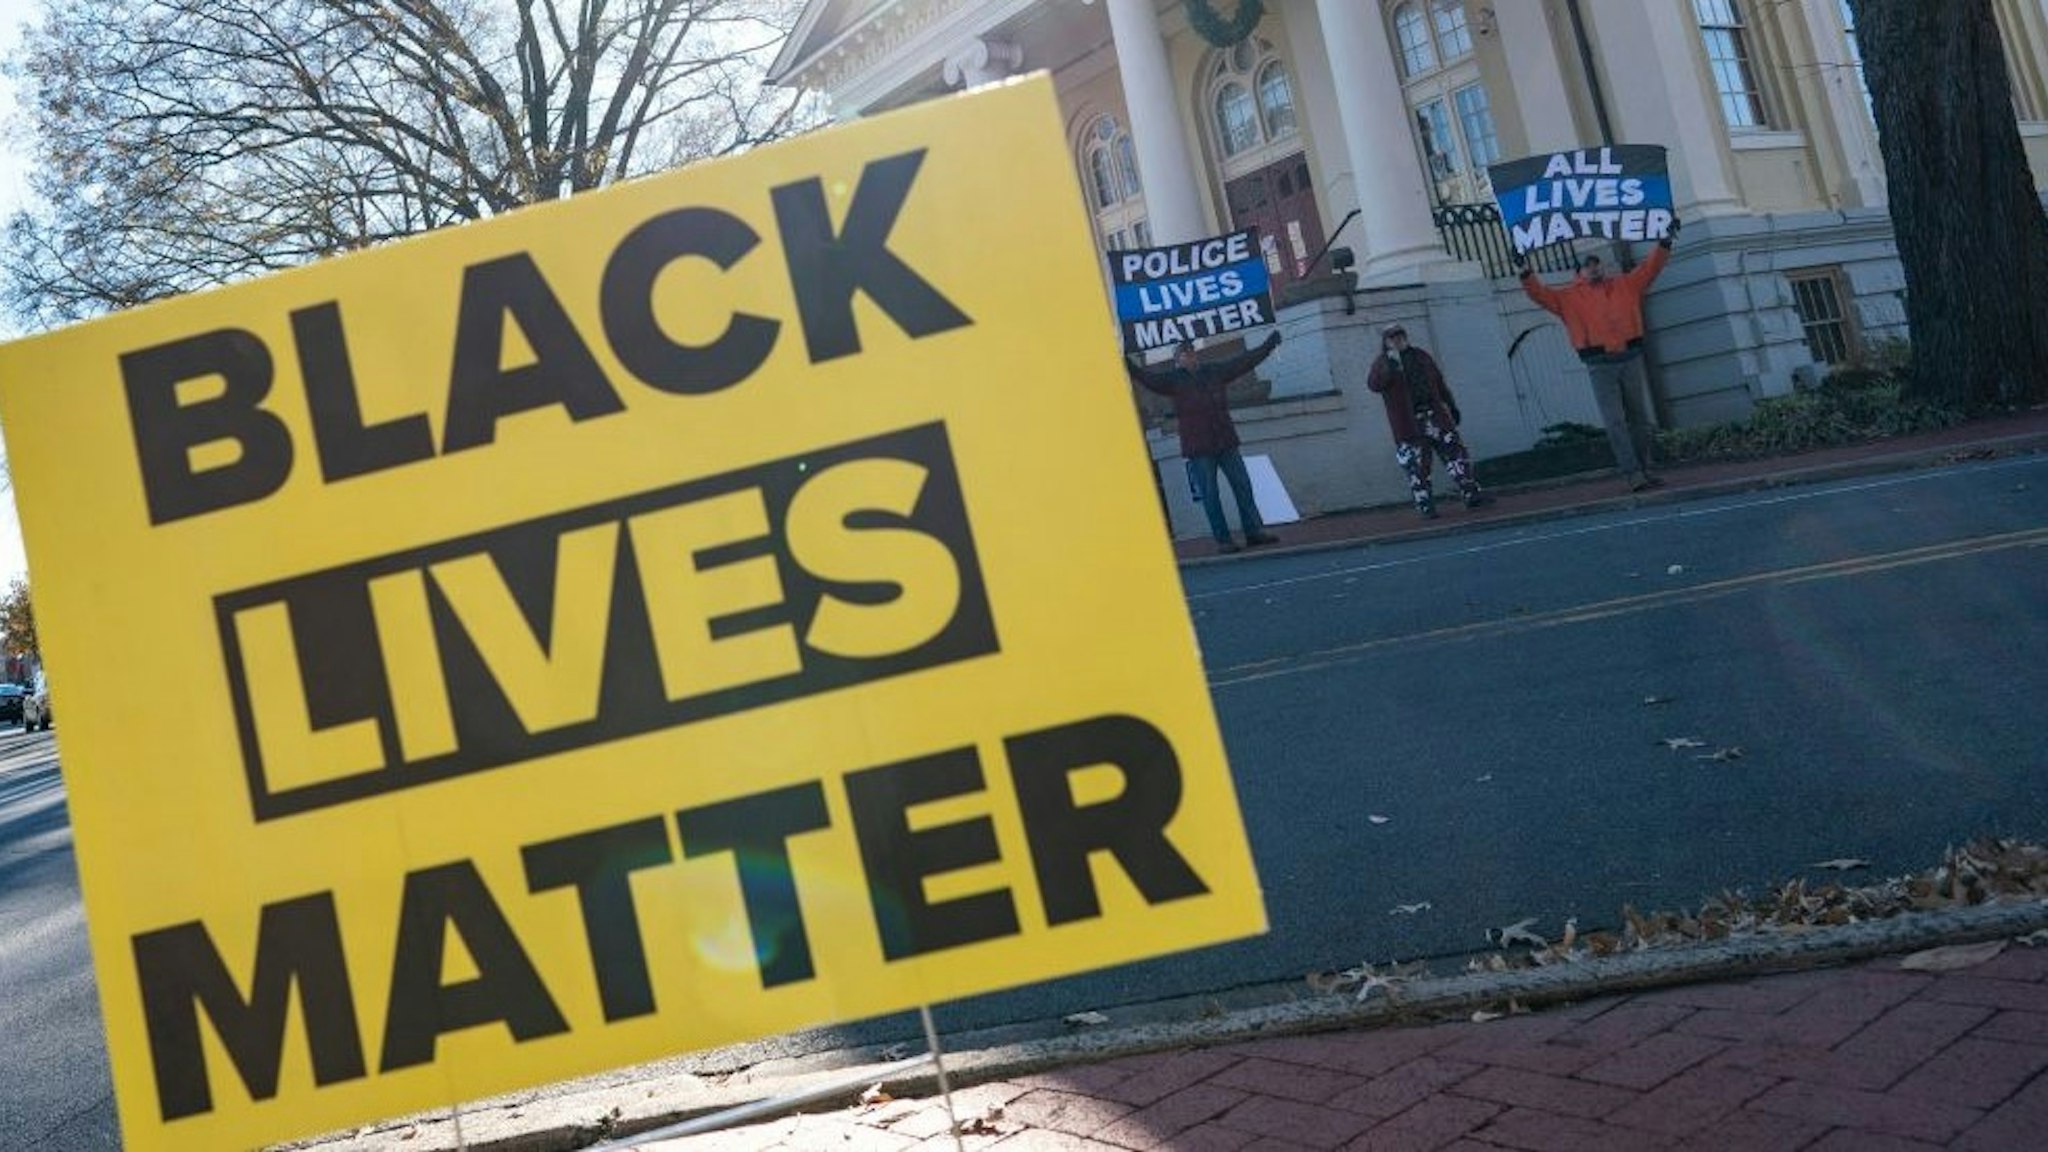 Demonstrators holding protest signs reading 'Police Lives Matter', and 'All Lives Matter' demonstrate across the street from a 'Black Lives Matter' demonstration in the town square in Warrenton, Virginia on November 27, 2021. (Photo by ALEX EDELMAN / AFP) (Photo by